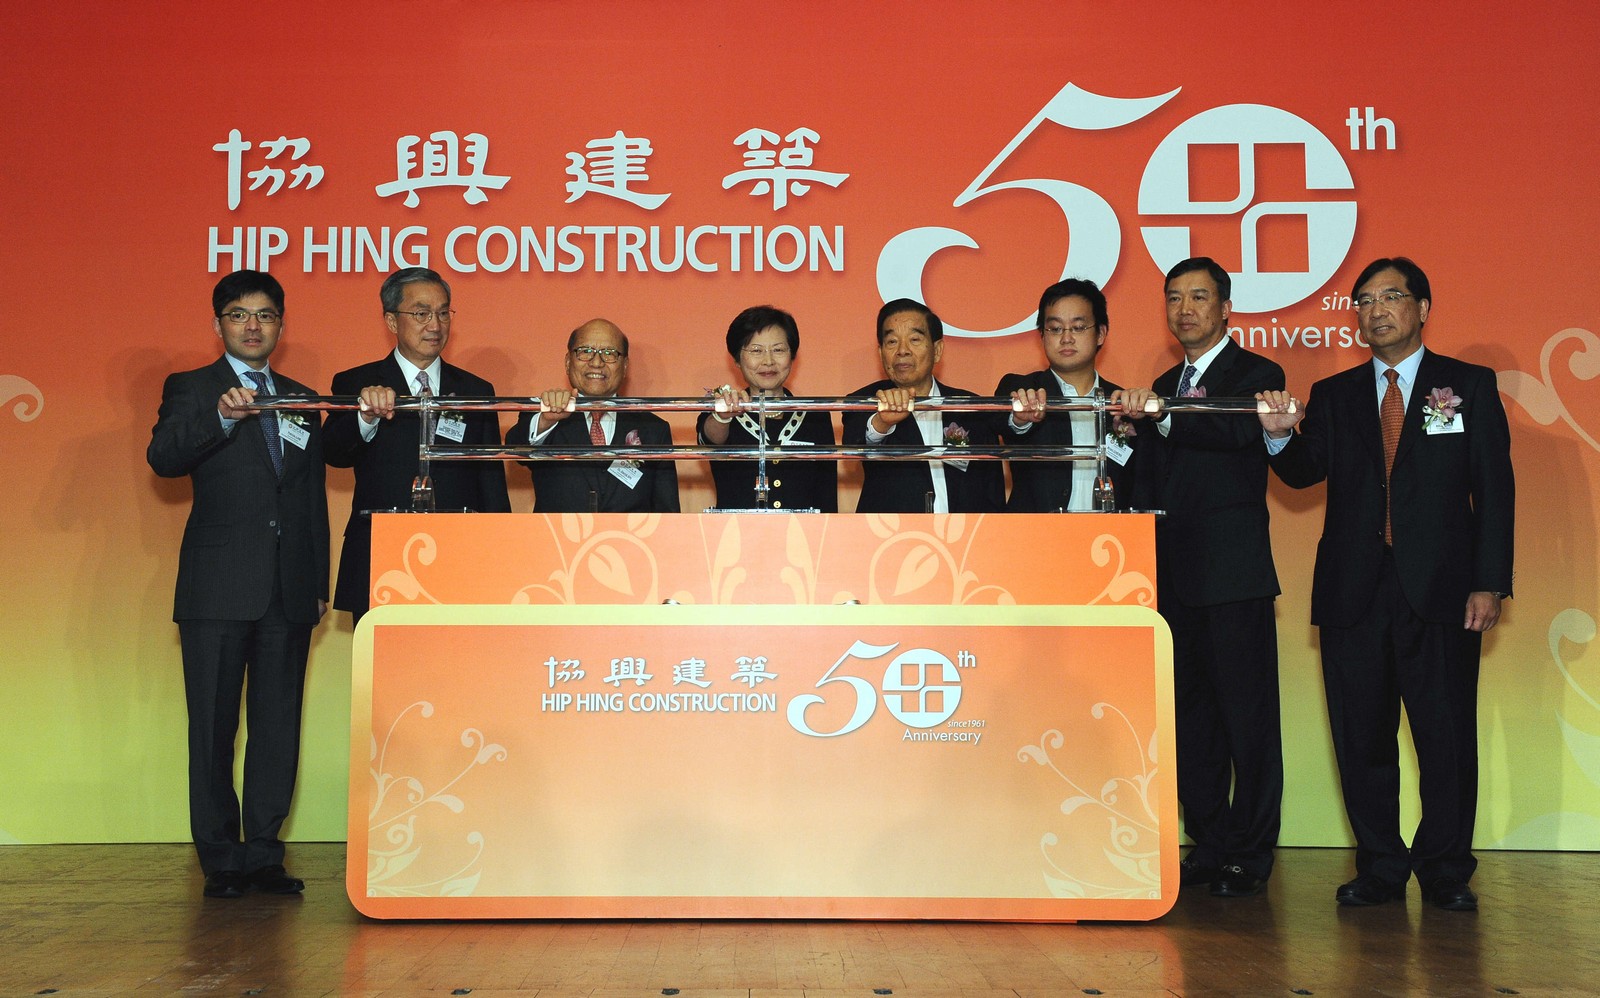 Hip Hing Construction Company Limited celebrated its 50th Anniversary with a cocktail reception. Officiating guests included Carrie Lam, Secretary for Development and Dr Cheng Yu Tung, Chairman of New World Group, etc.